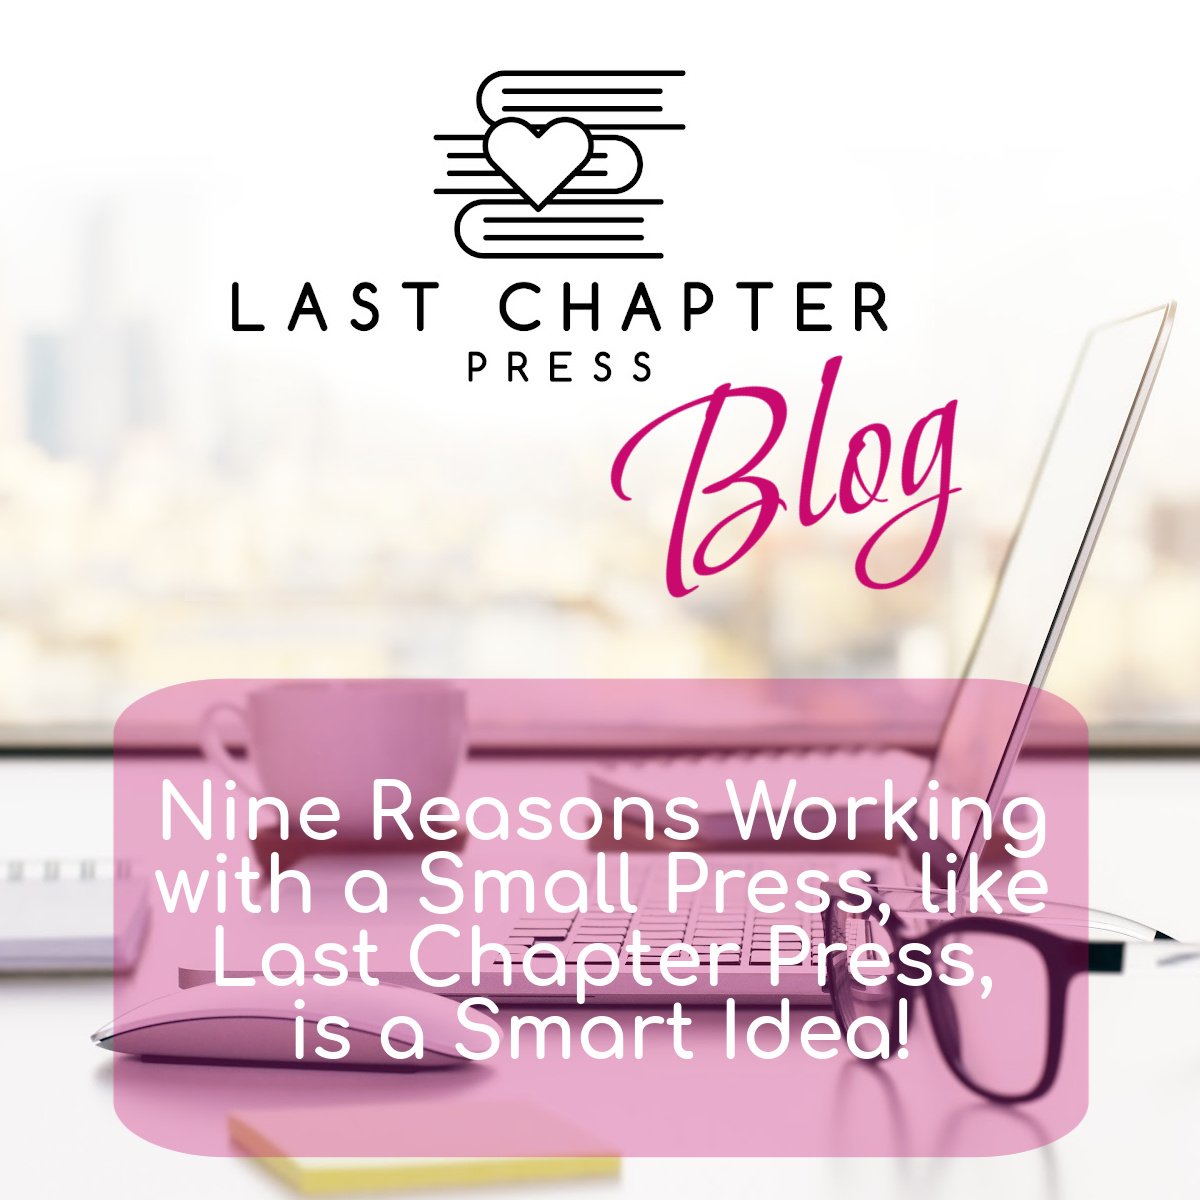 Nine reasons working with a small press, like Last Chapter Press, is a smart idea!